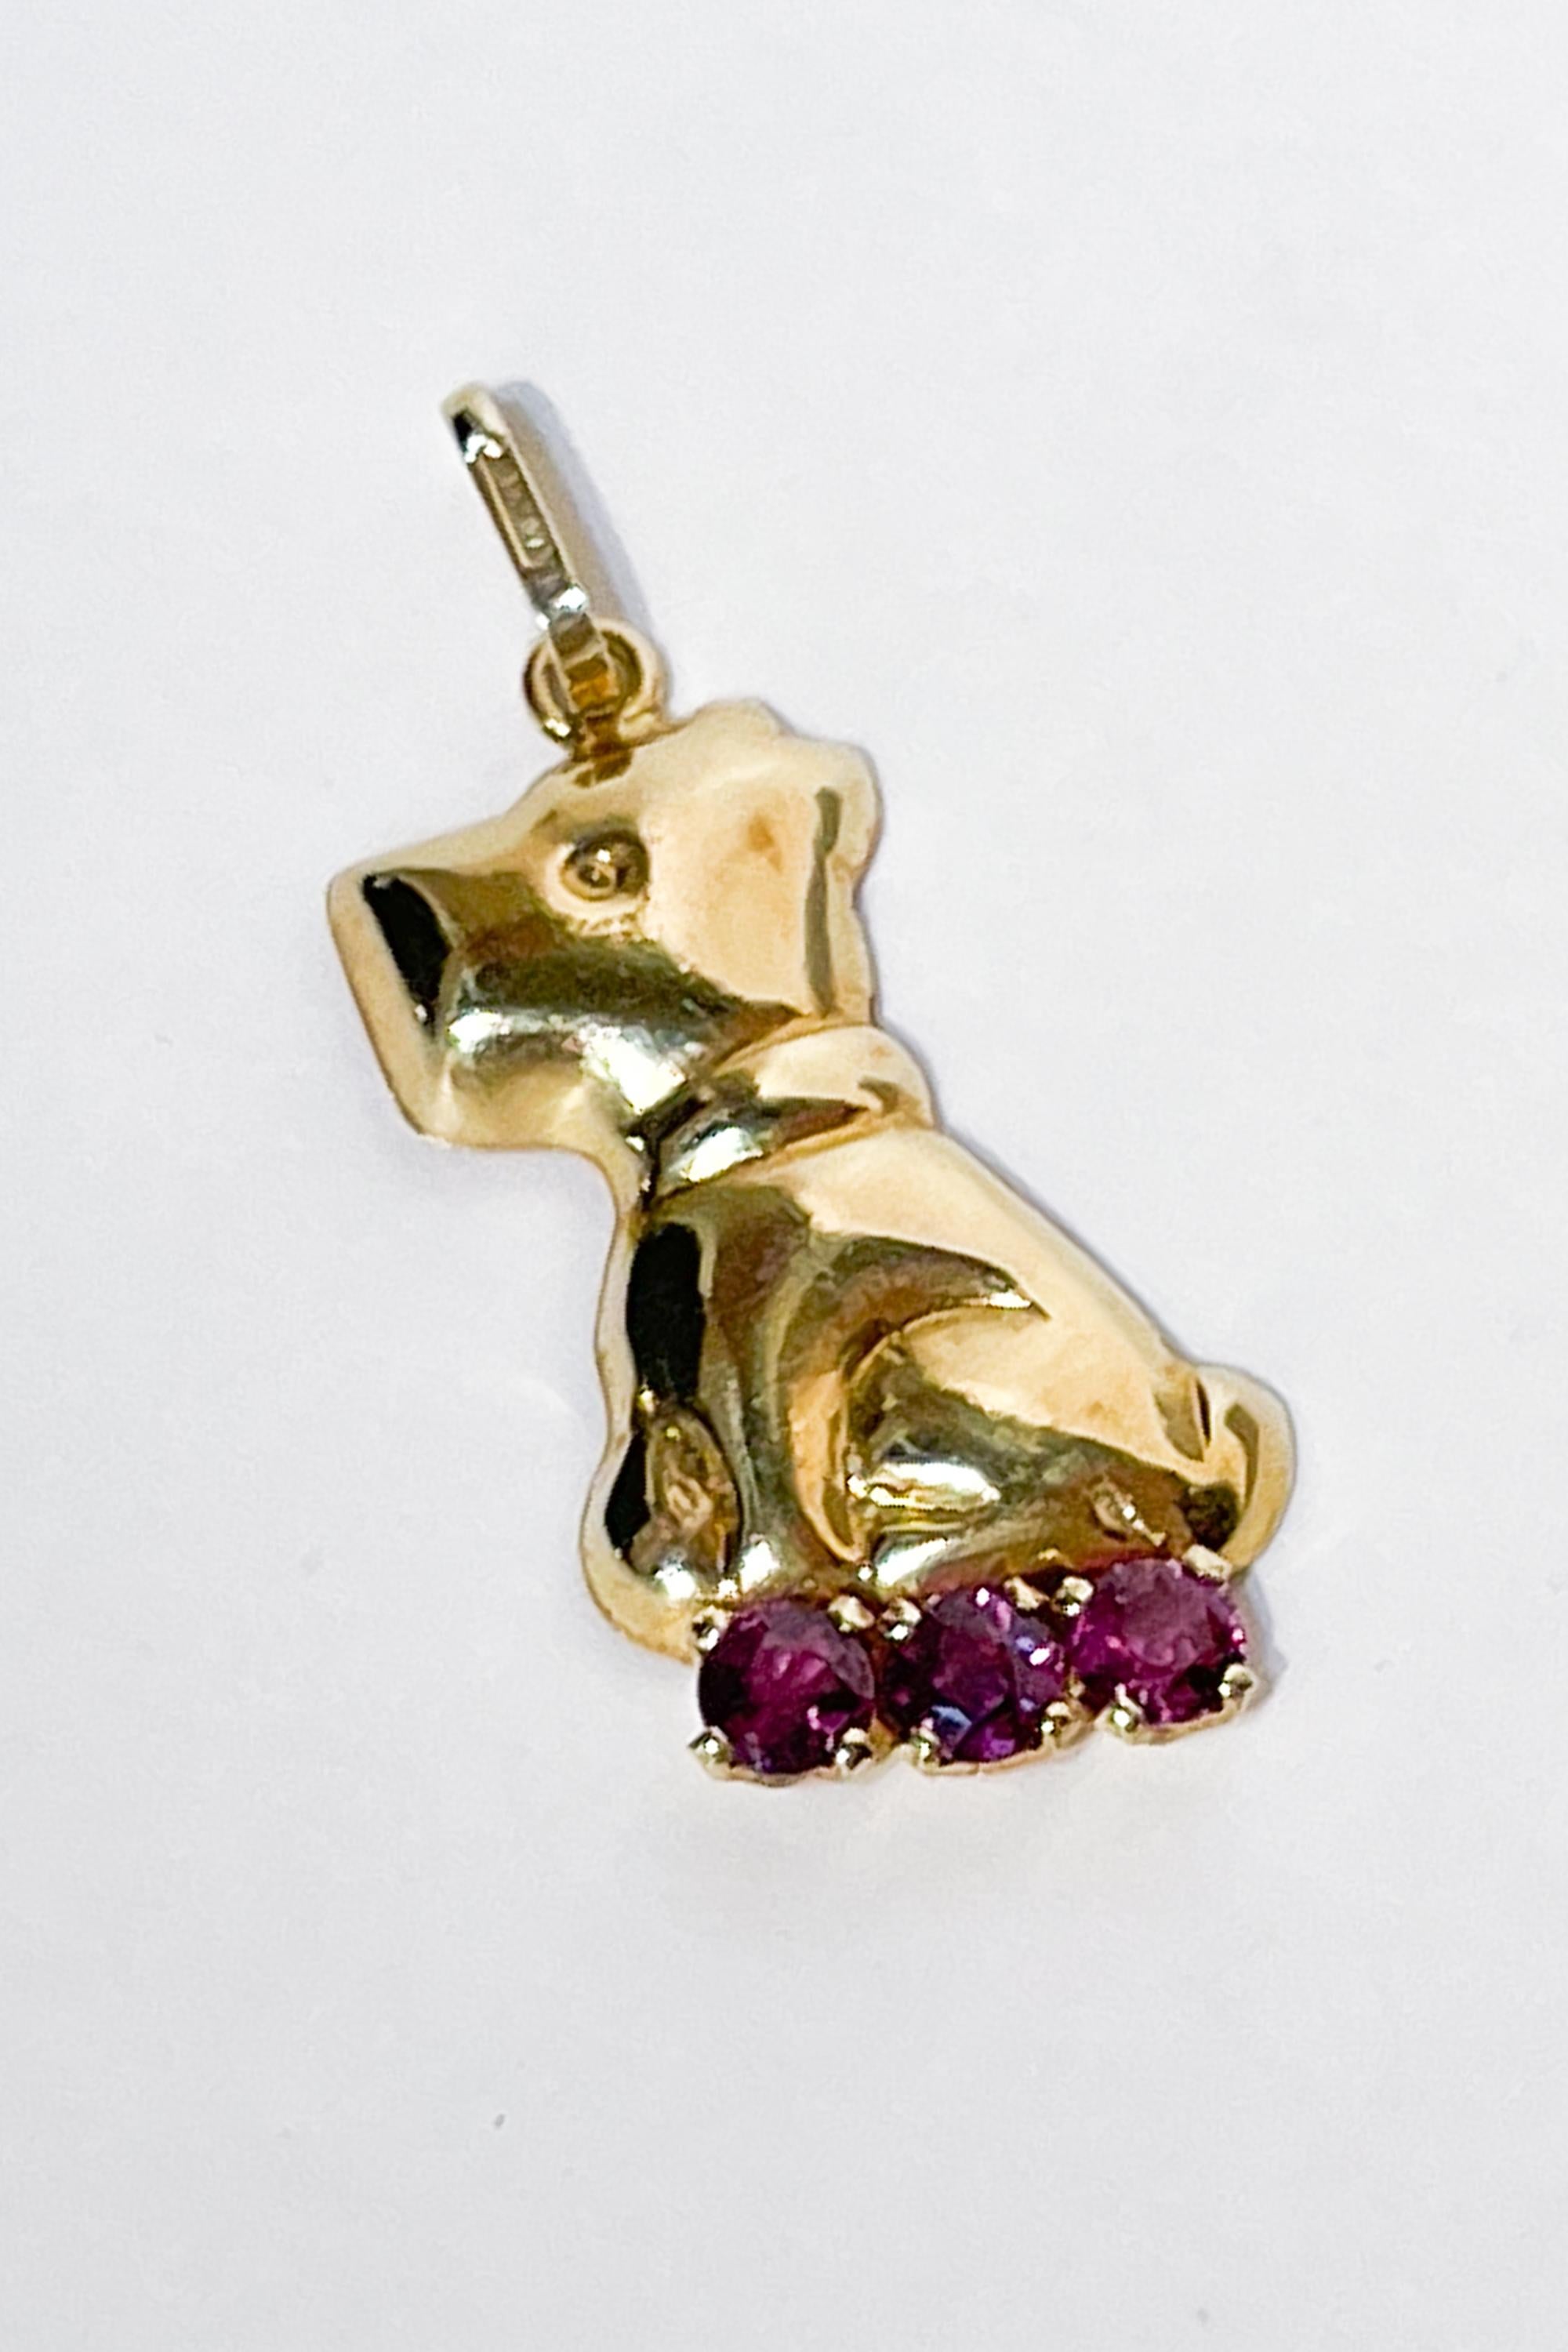 Italian 18 carat Yellow Gold Dog Pendant.
Mid 20th century. Circa 1960-1970.
Height 2,9cm
Large 1.7cm
In good condition.
Italian Hallmarks for 18 carat/ 750 gold.
Weight 1.20 gr.
Set with red precious stones.
Fully insured shipping with signed